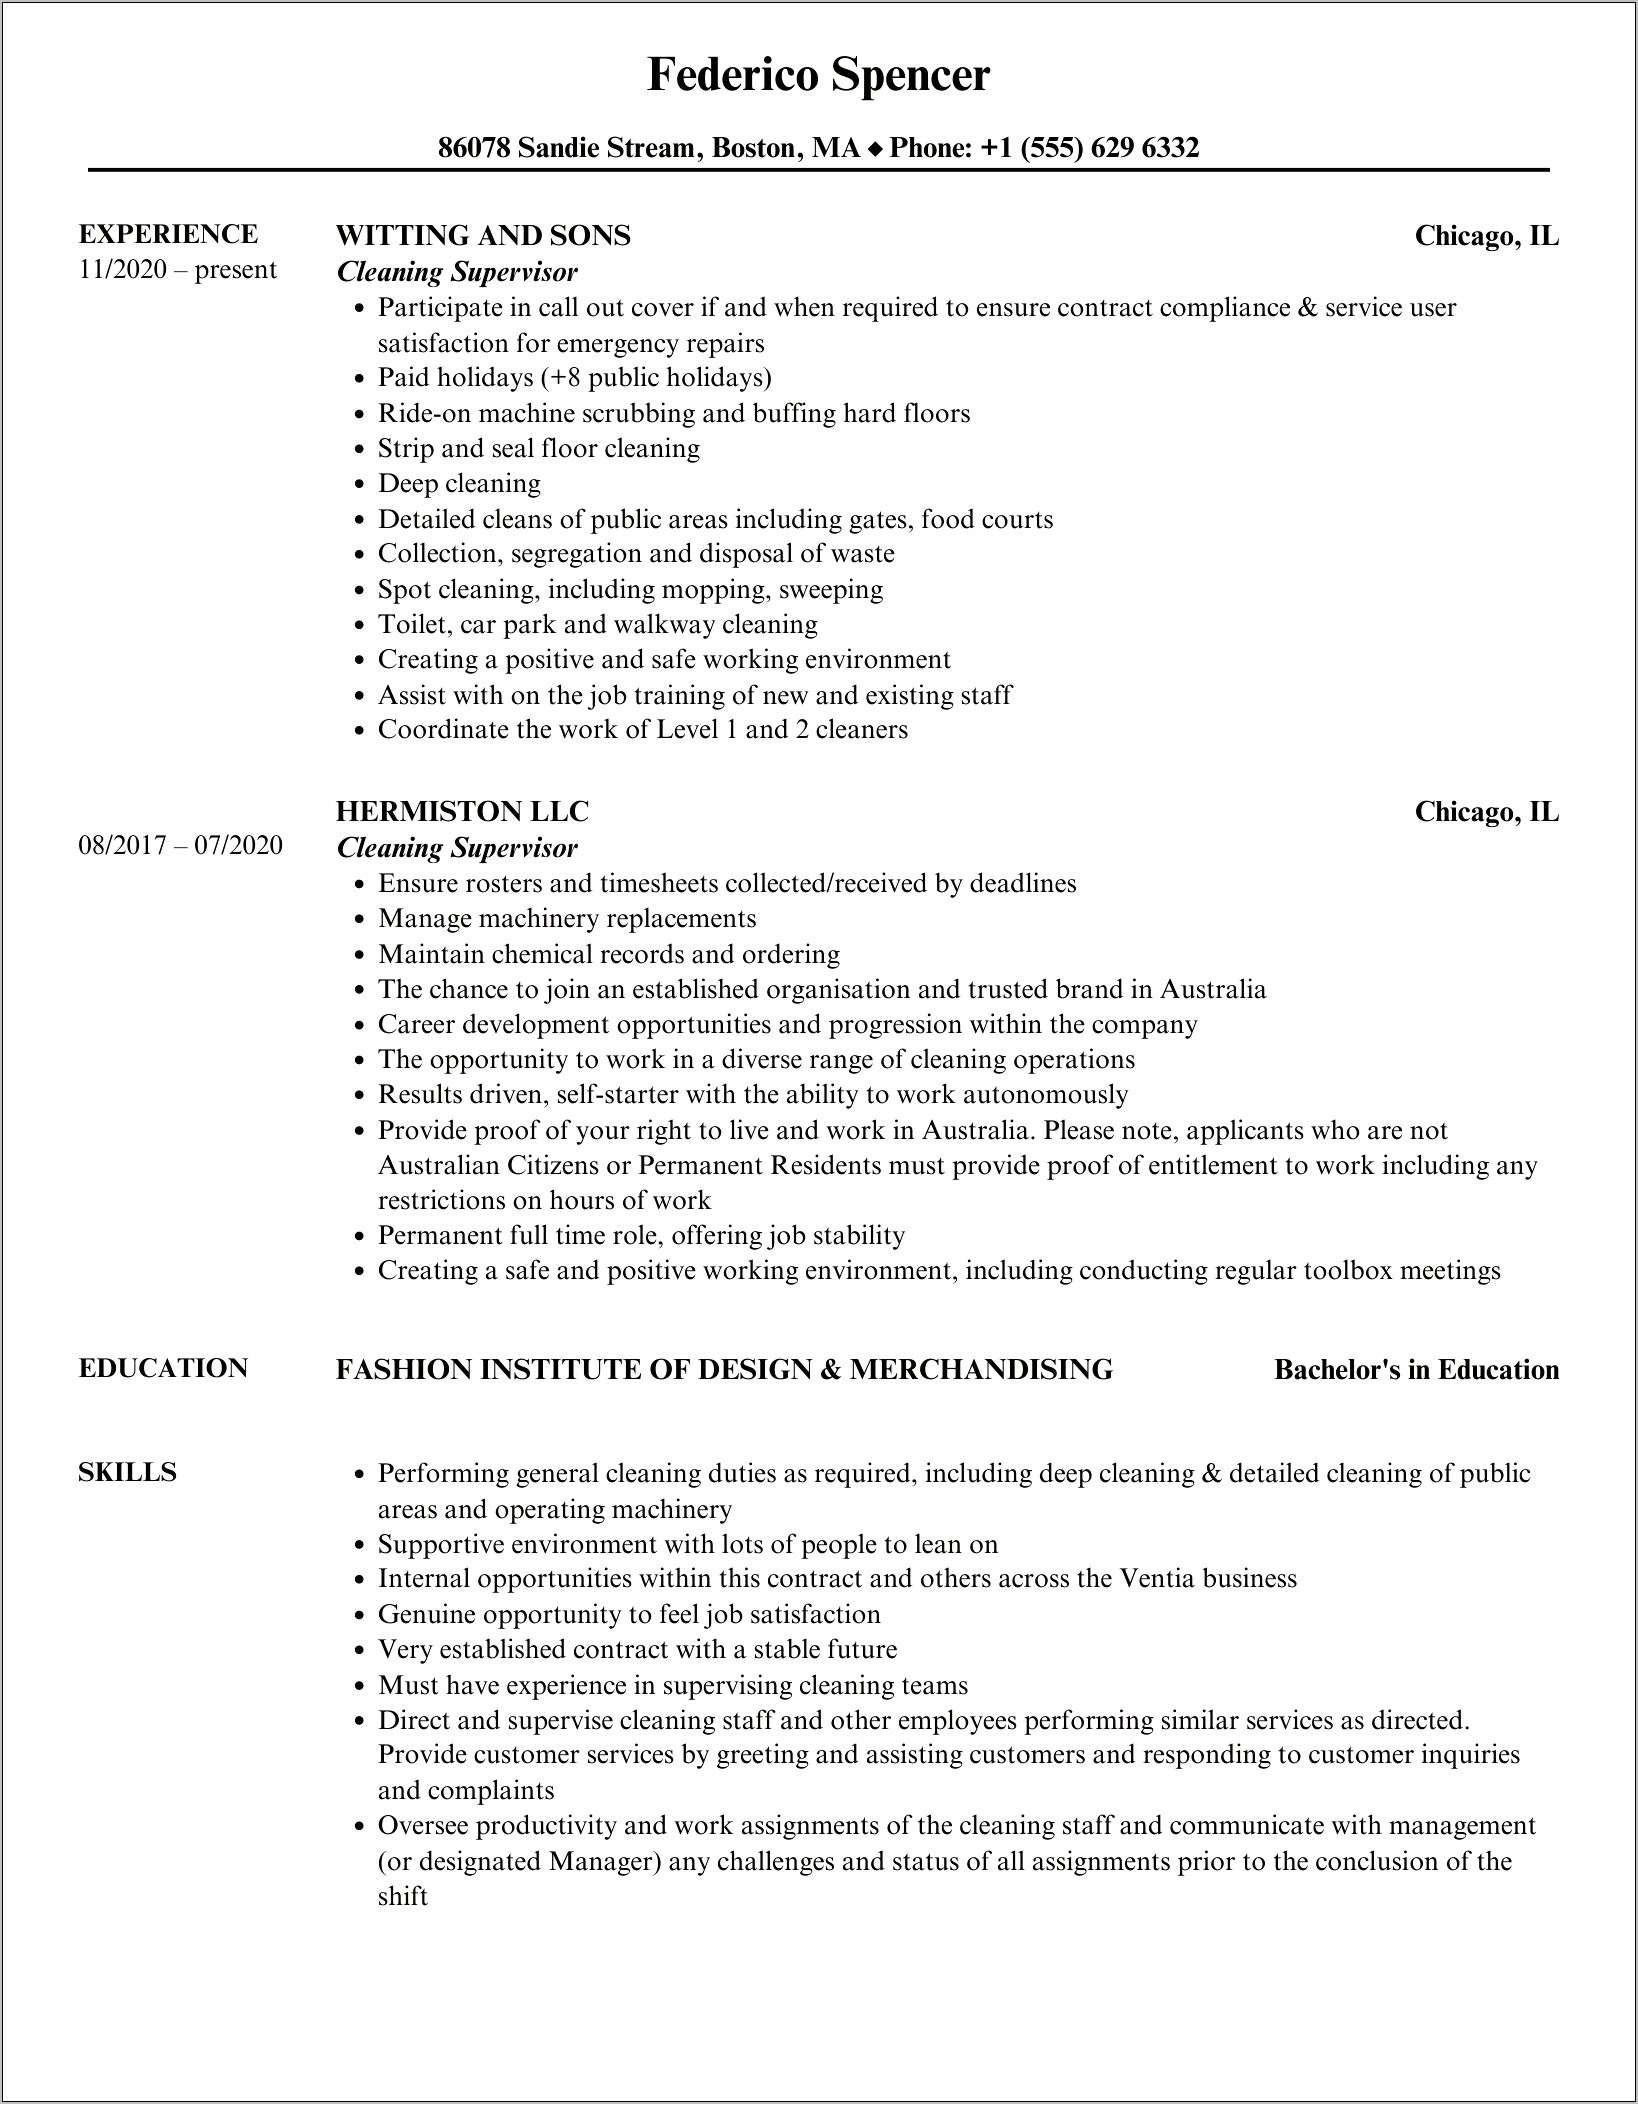 Example Resume For Cleaning Supervisor